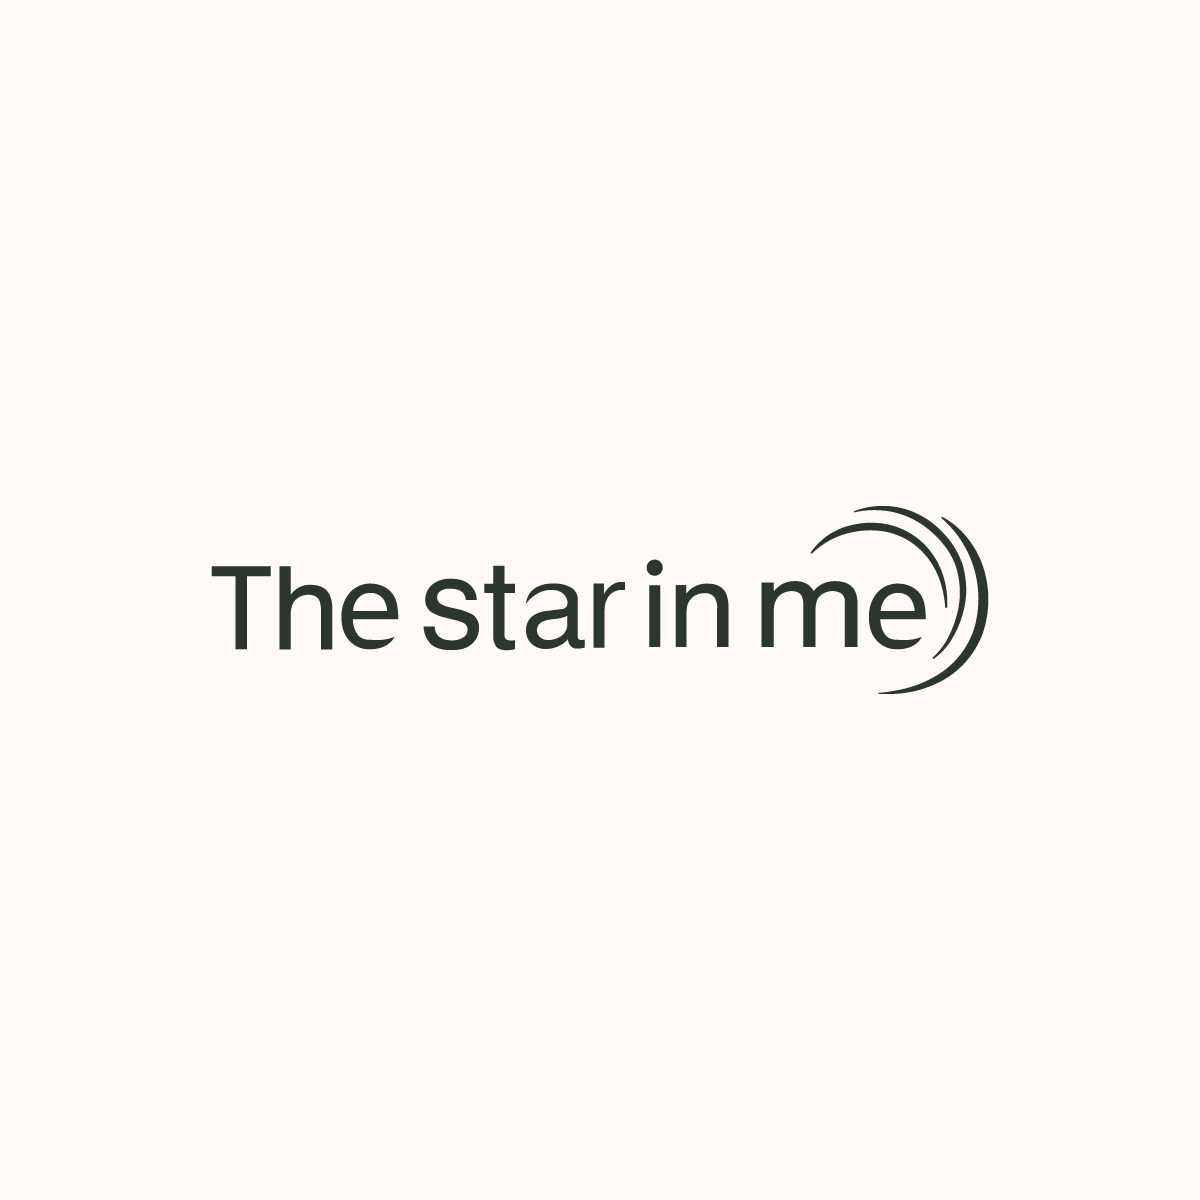 The star in me